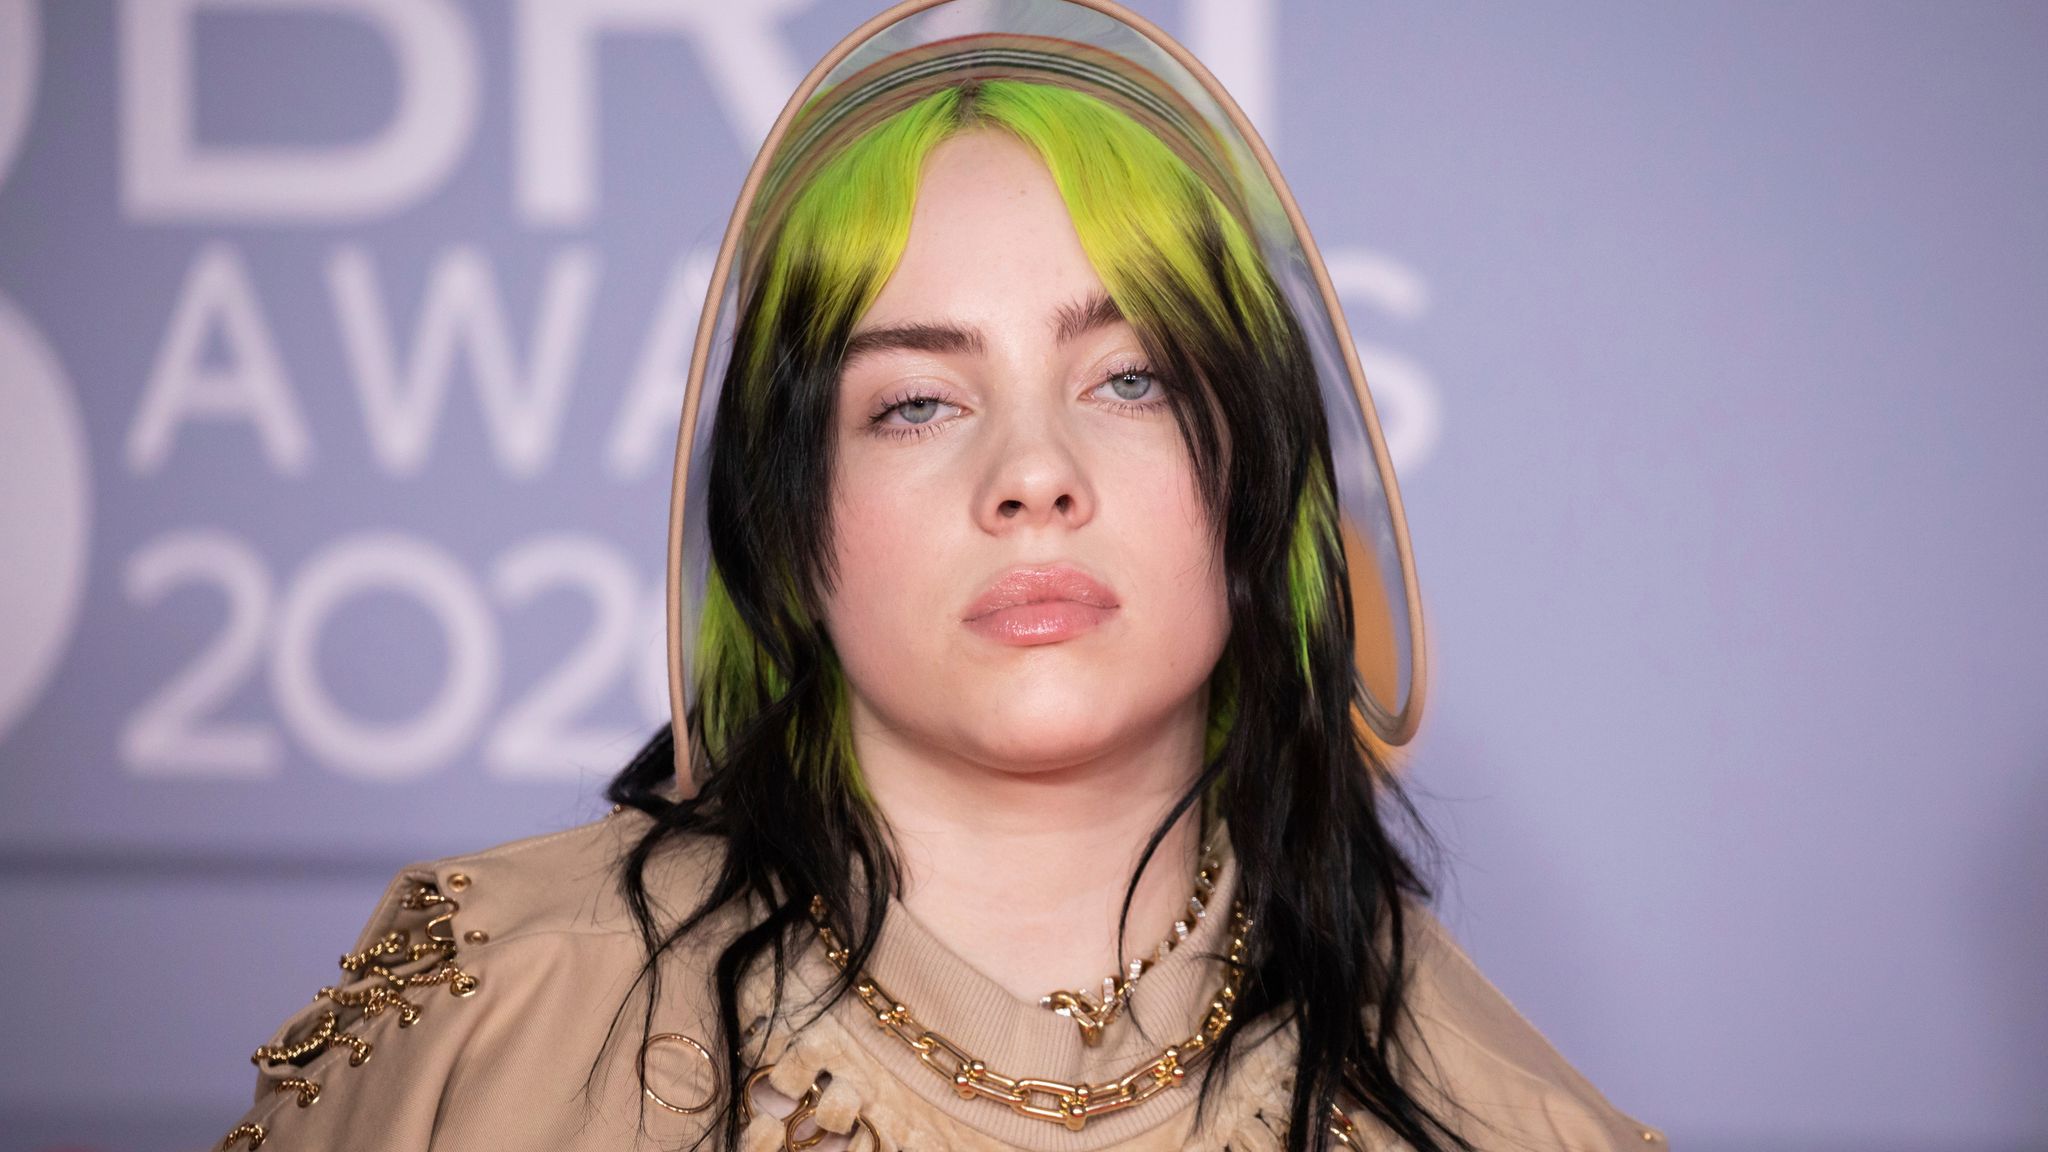 Billie Eilish Sexual Exploitation Of Young People Goes On Everywhere